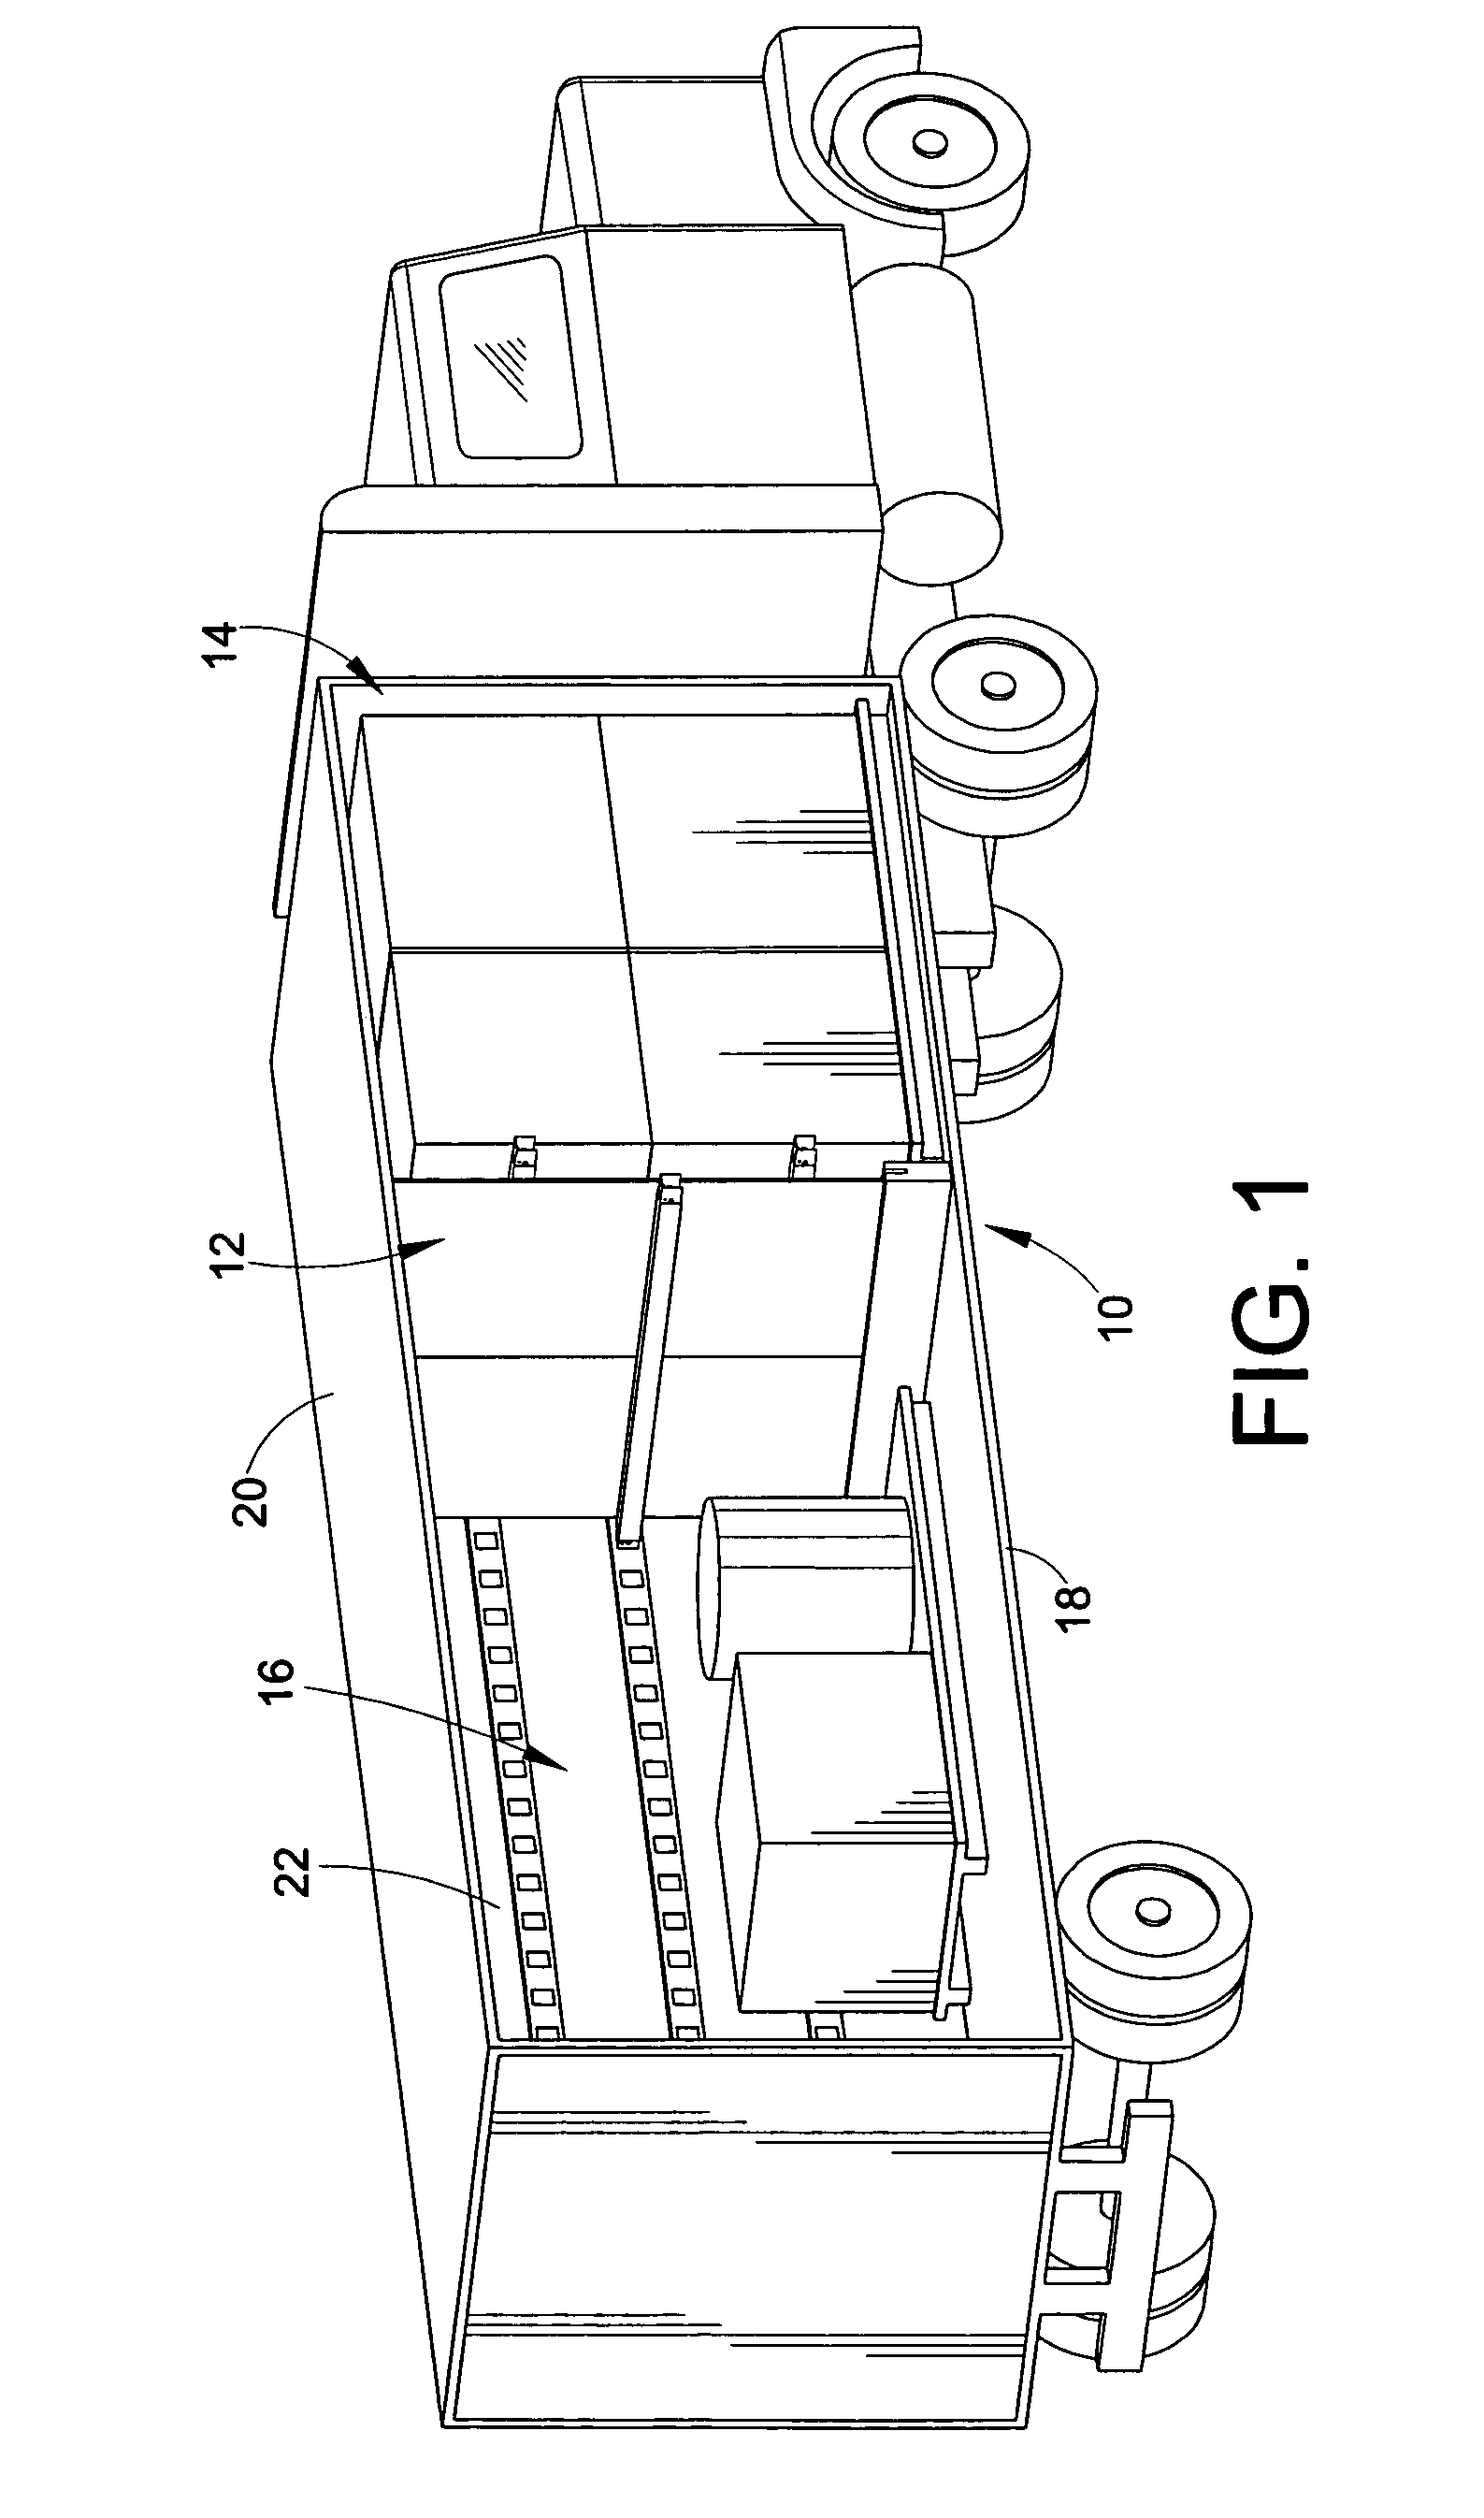 Container for secure transport of cargo